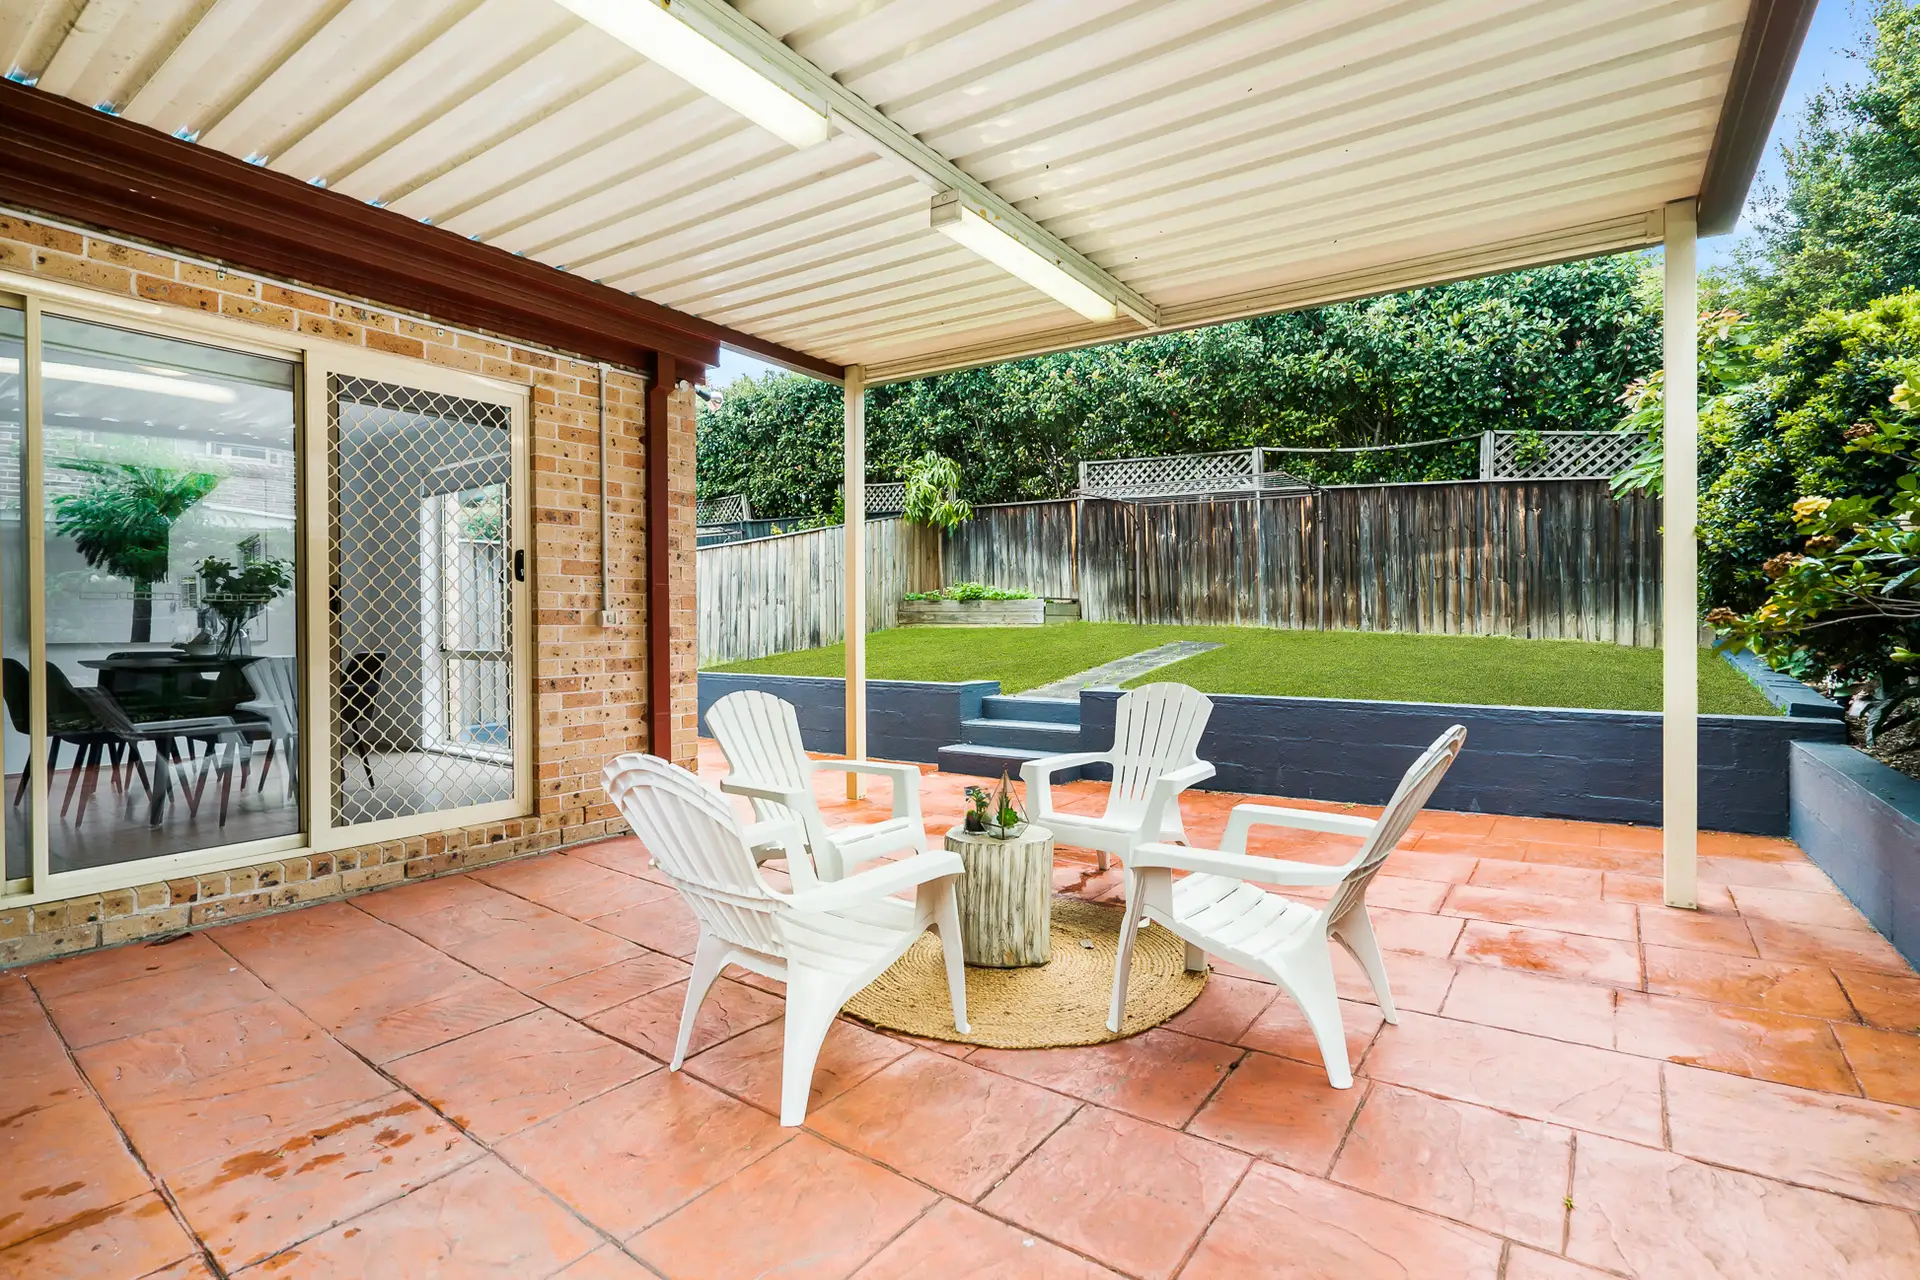 Photo #4: 1/4 Haven Court, Cherrybrook - Sold by Louis Carr Real Estate